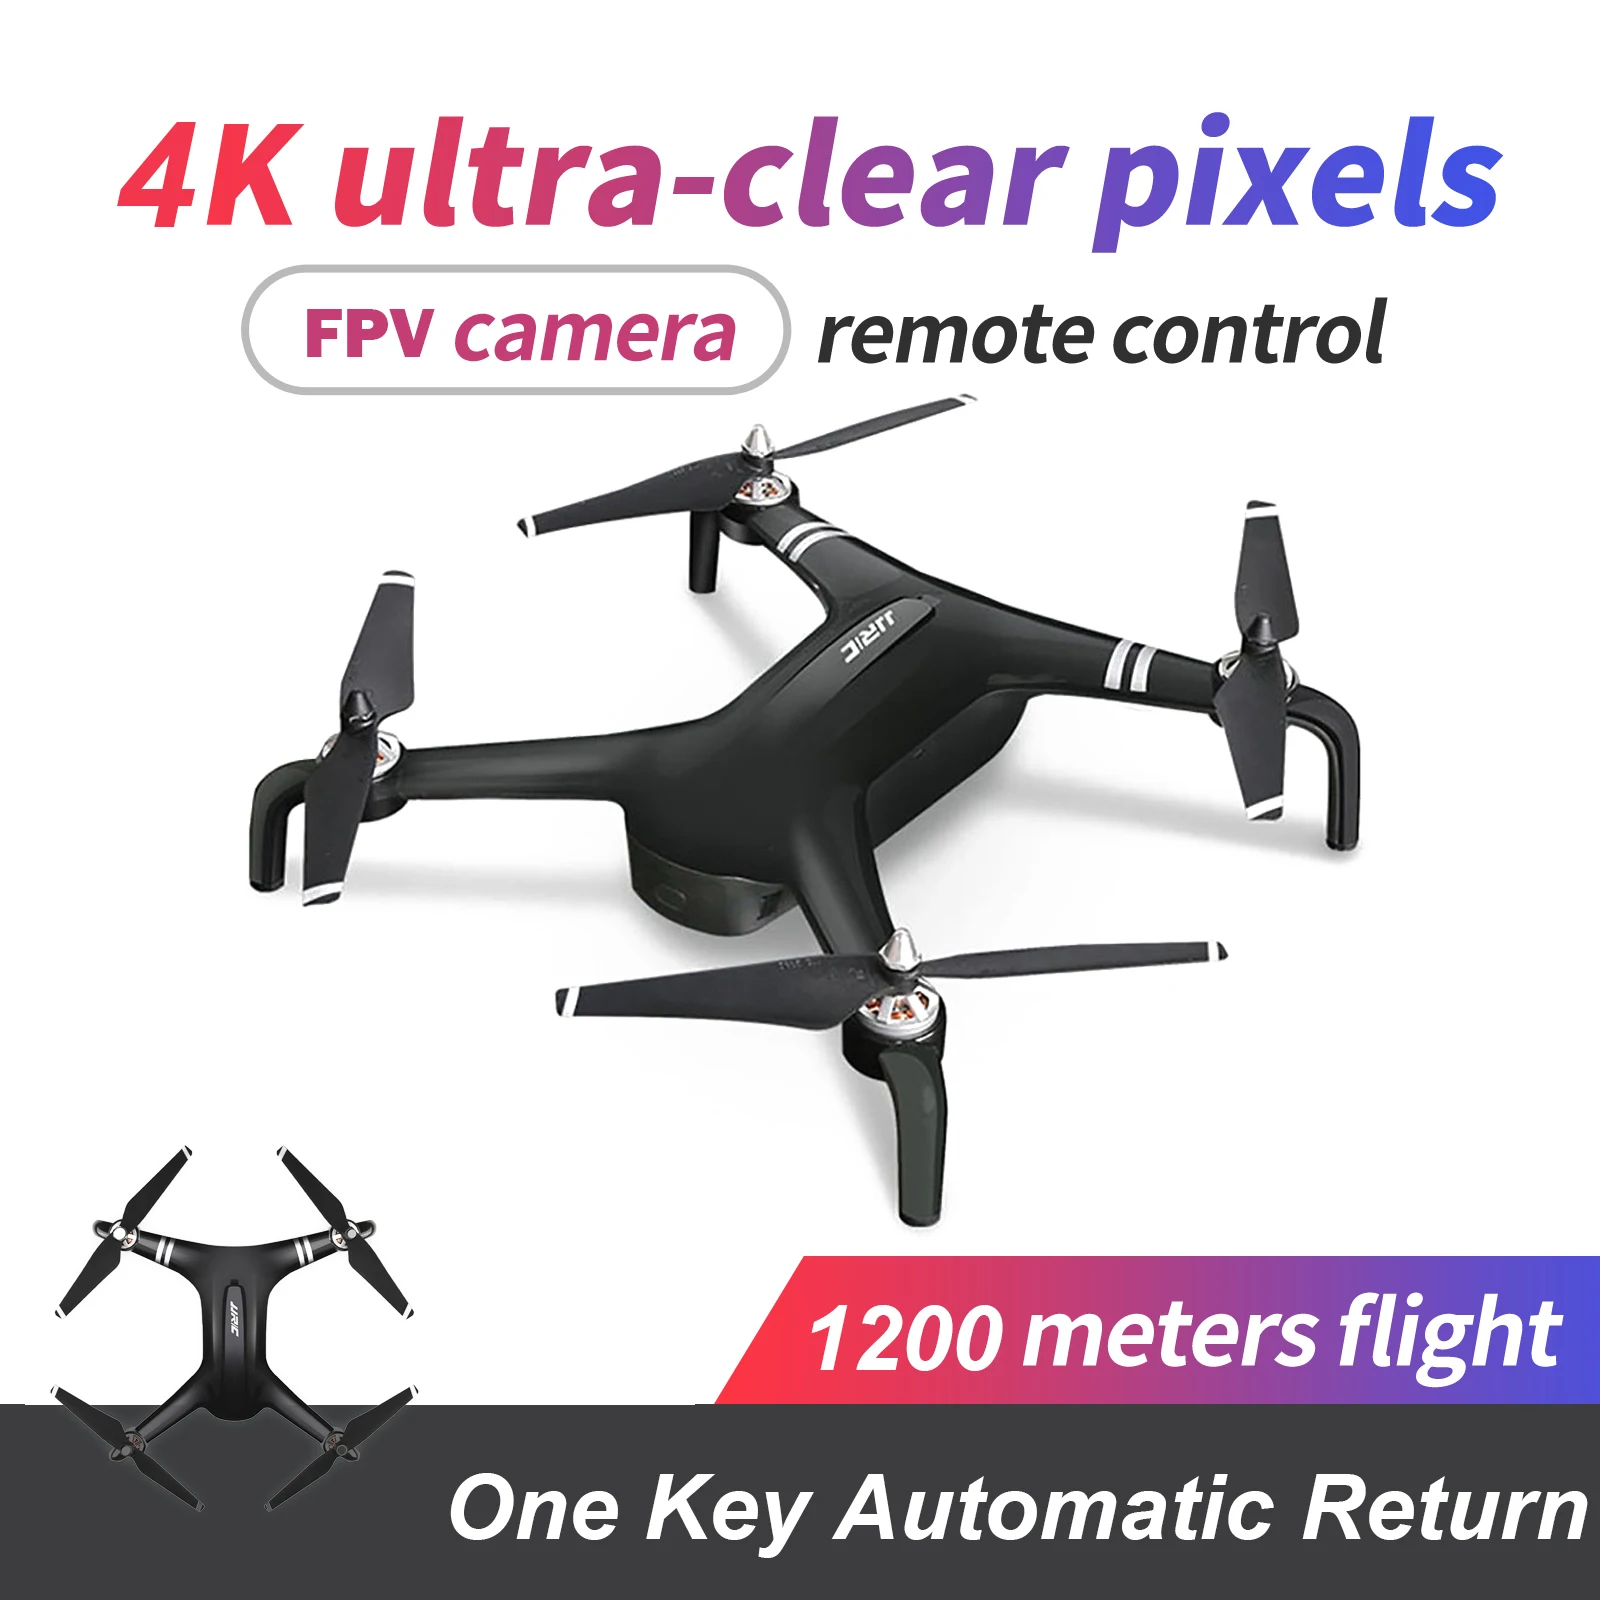 

JJRC X7P SMART 5G WIFI 1KM FPV 4K Camera Two-axis Gimbal Brushless Motor RC Drone Quadcopter Multicopter RTF Model Toys